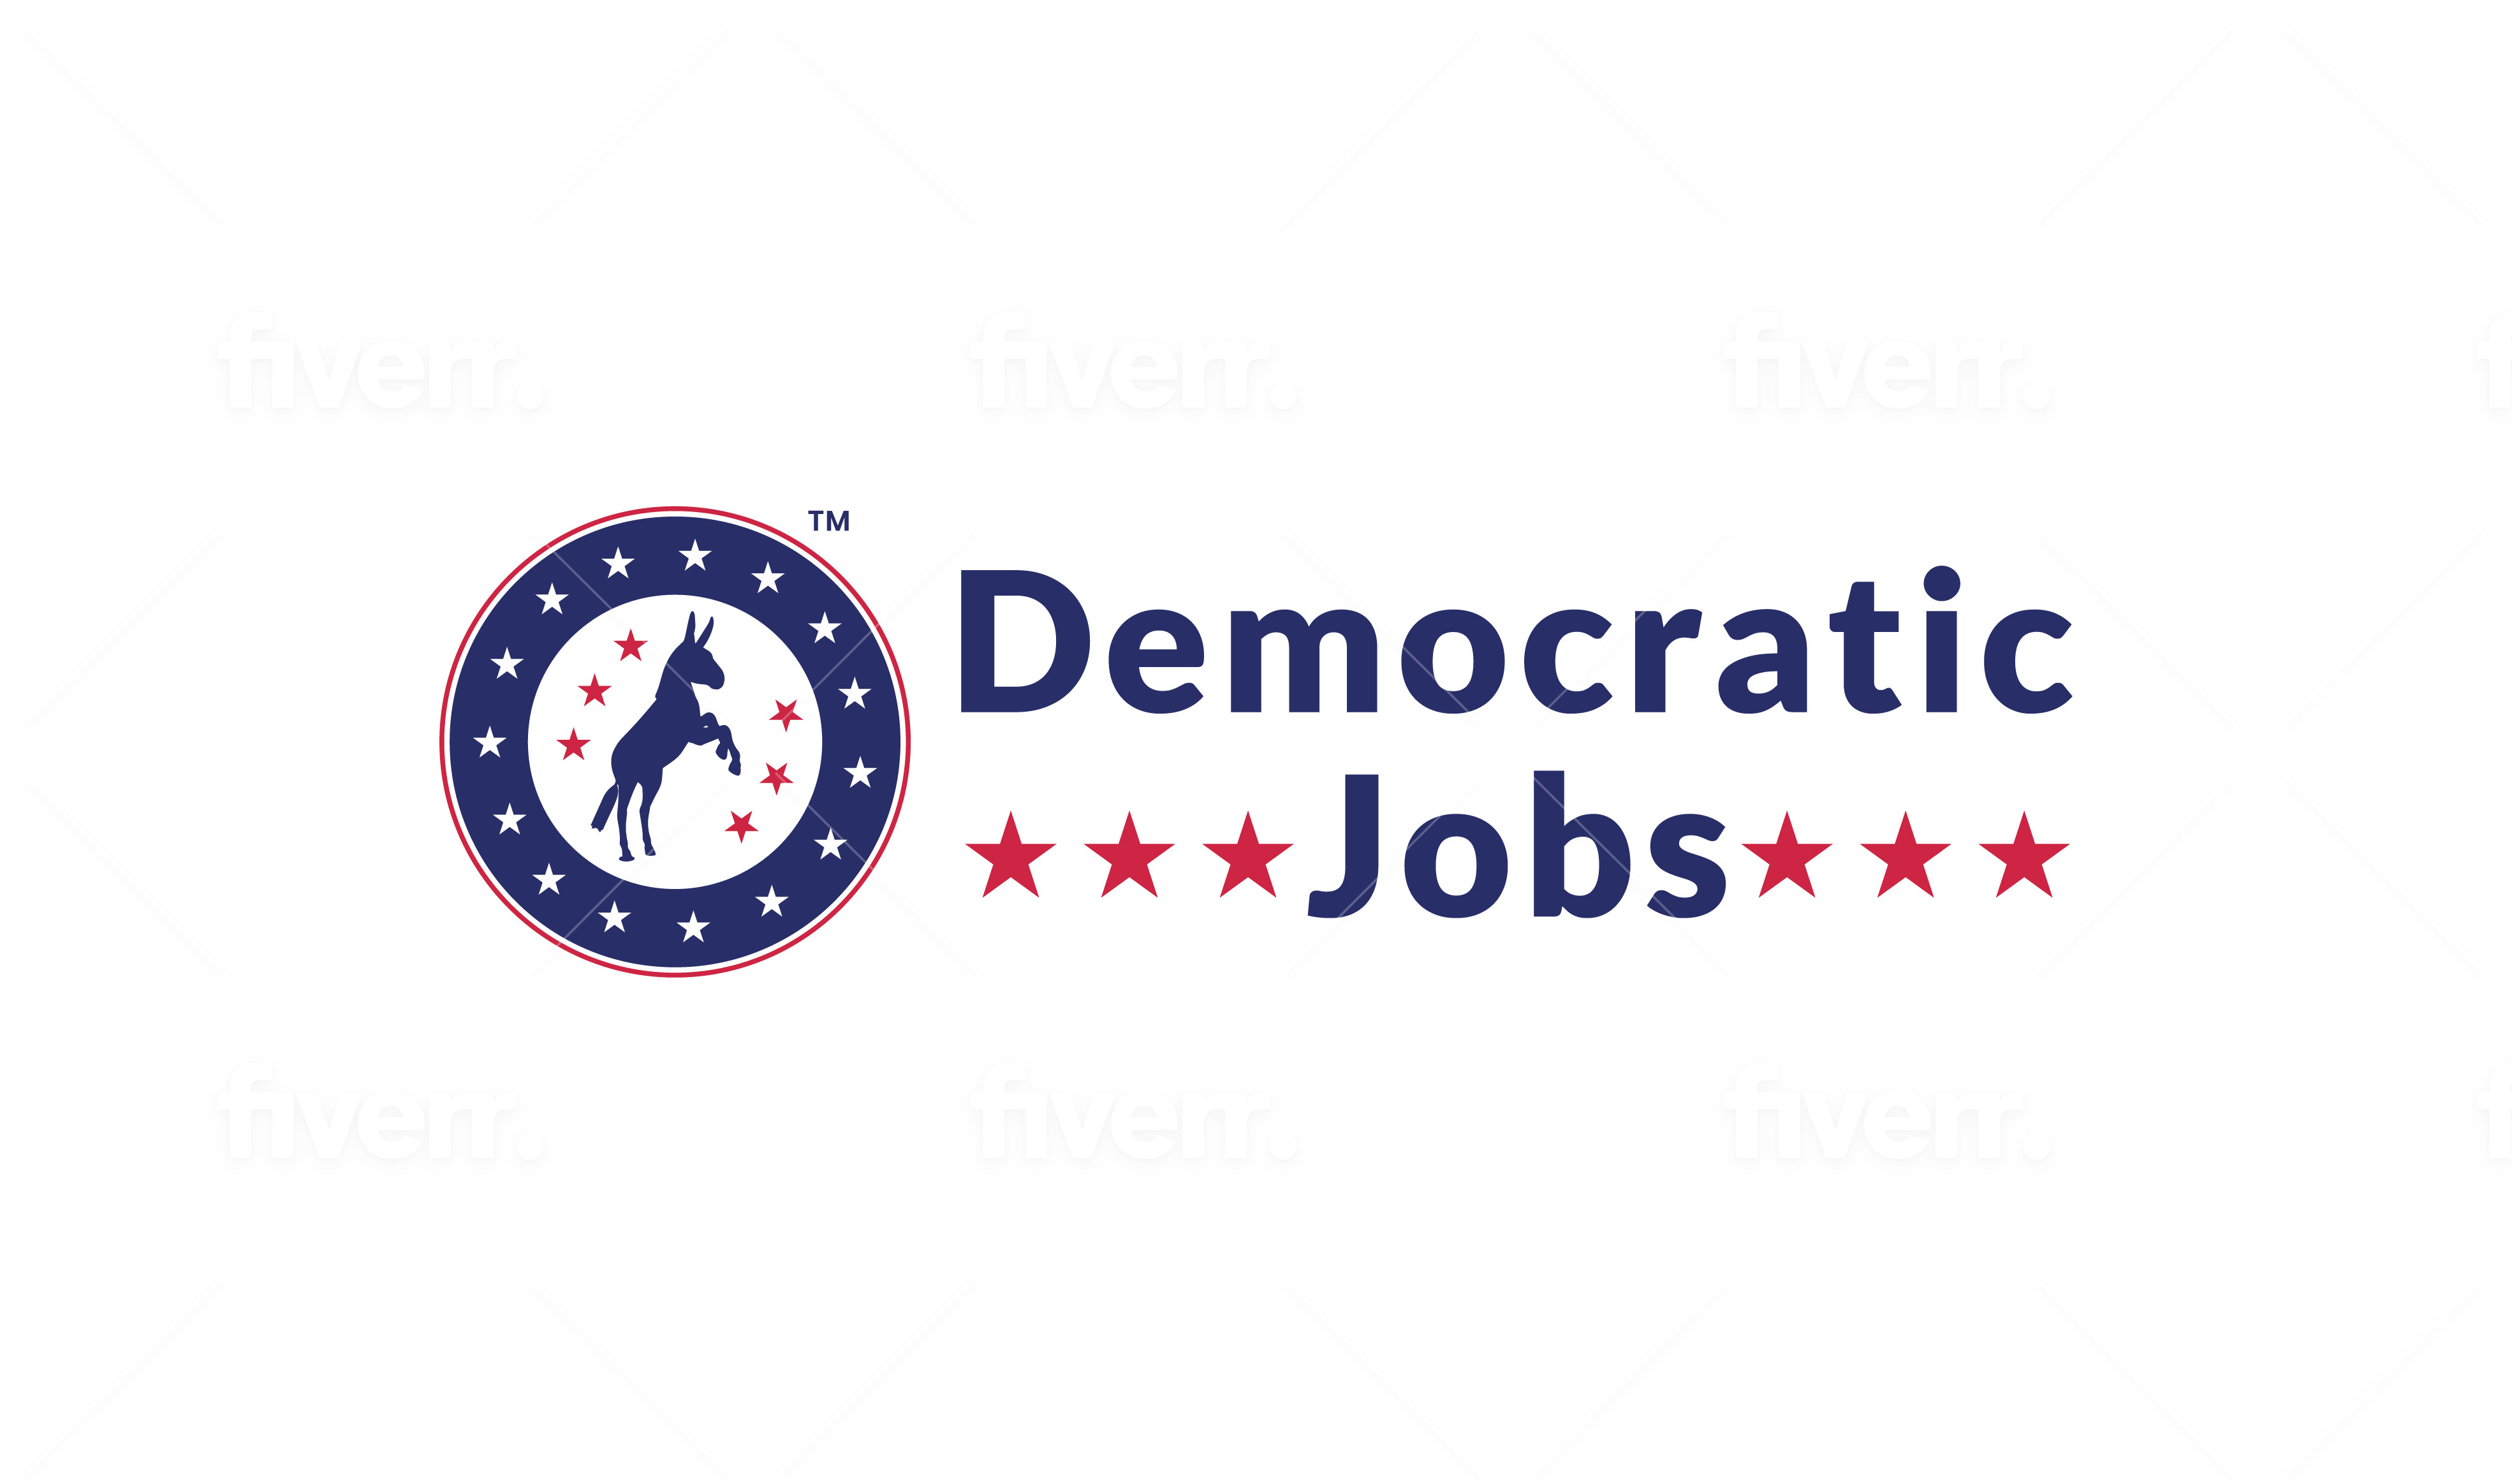 what are the main jobs in democratic republic of congo